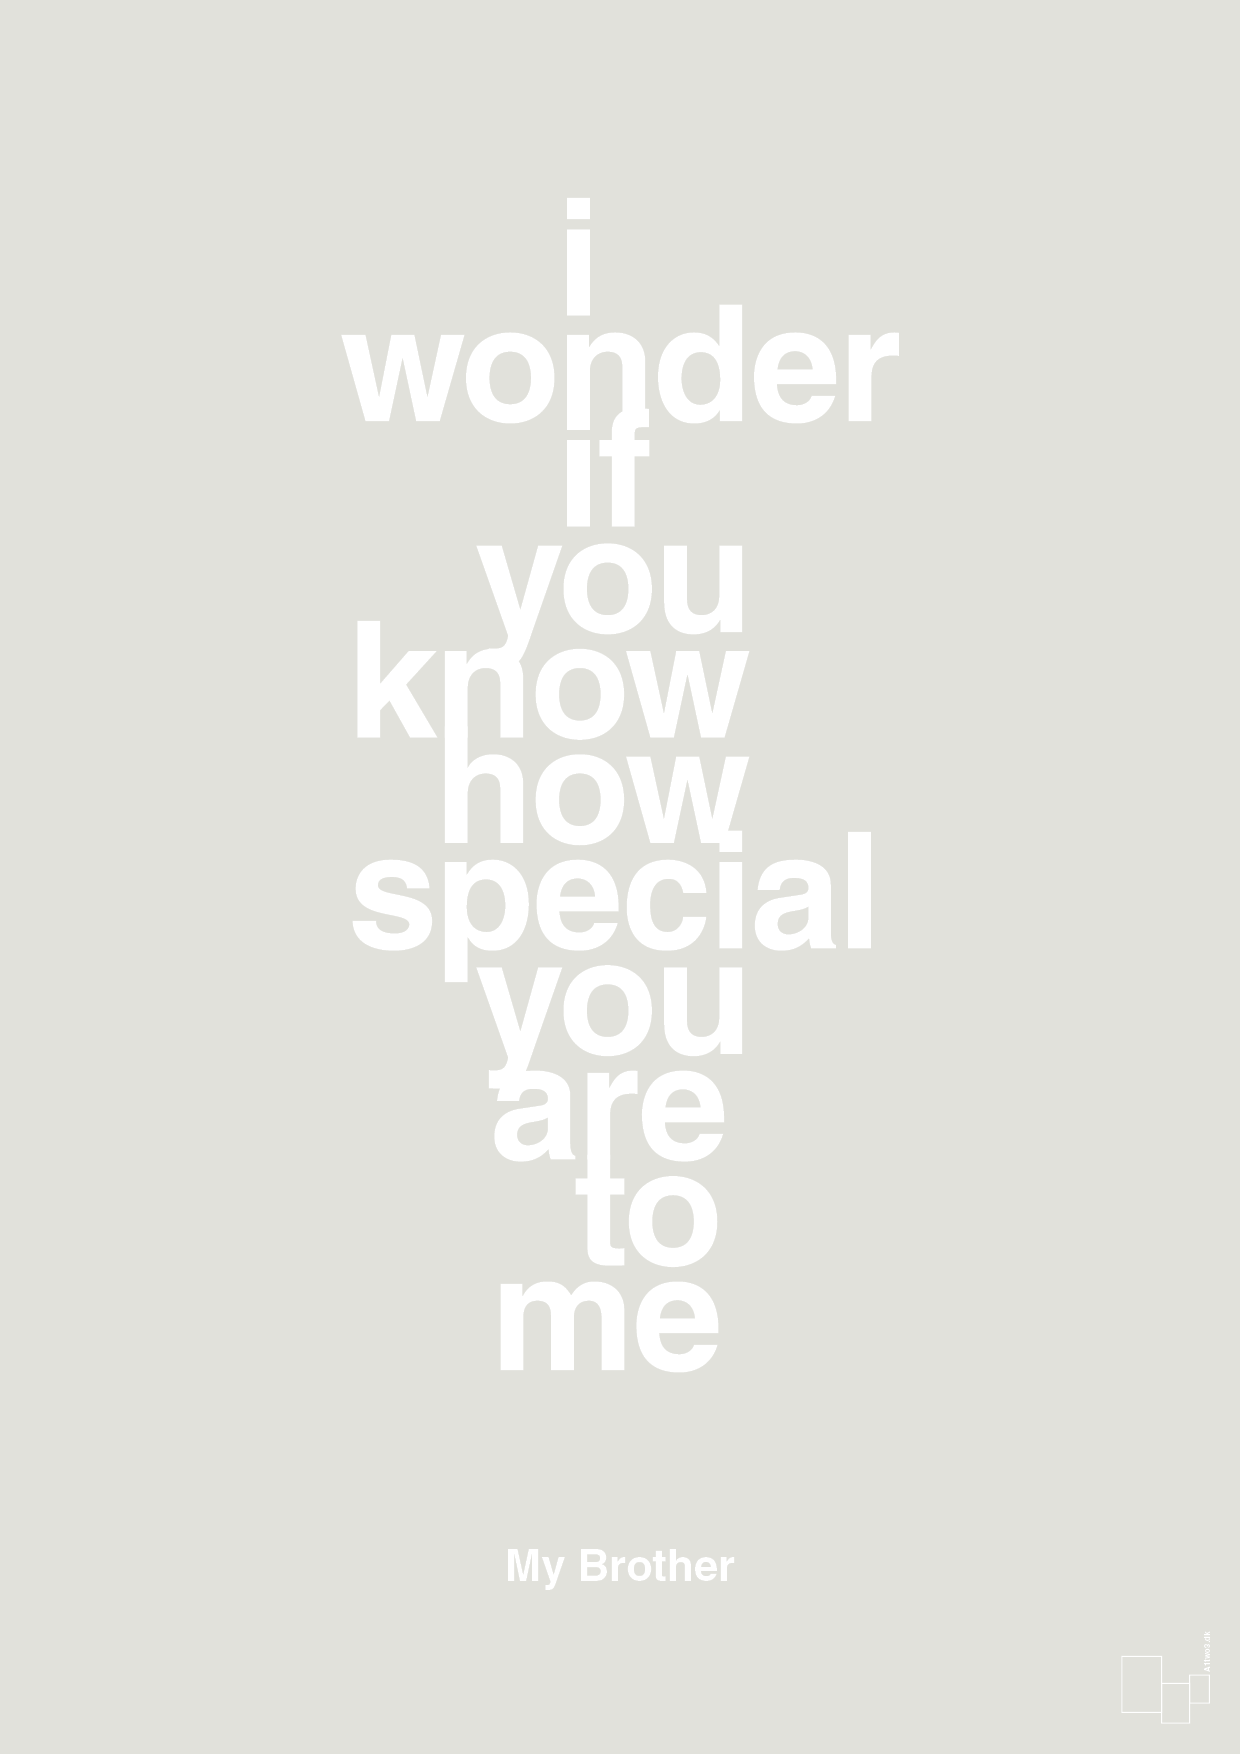 my brother - i wonder if you know how special you are to me - Plakat med Citater i Painters White